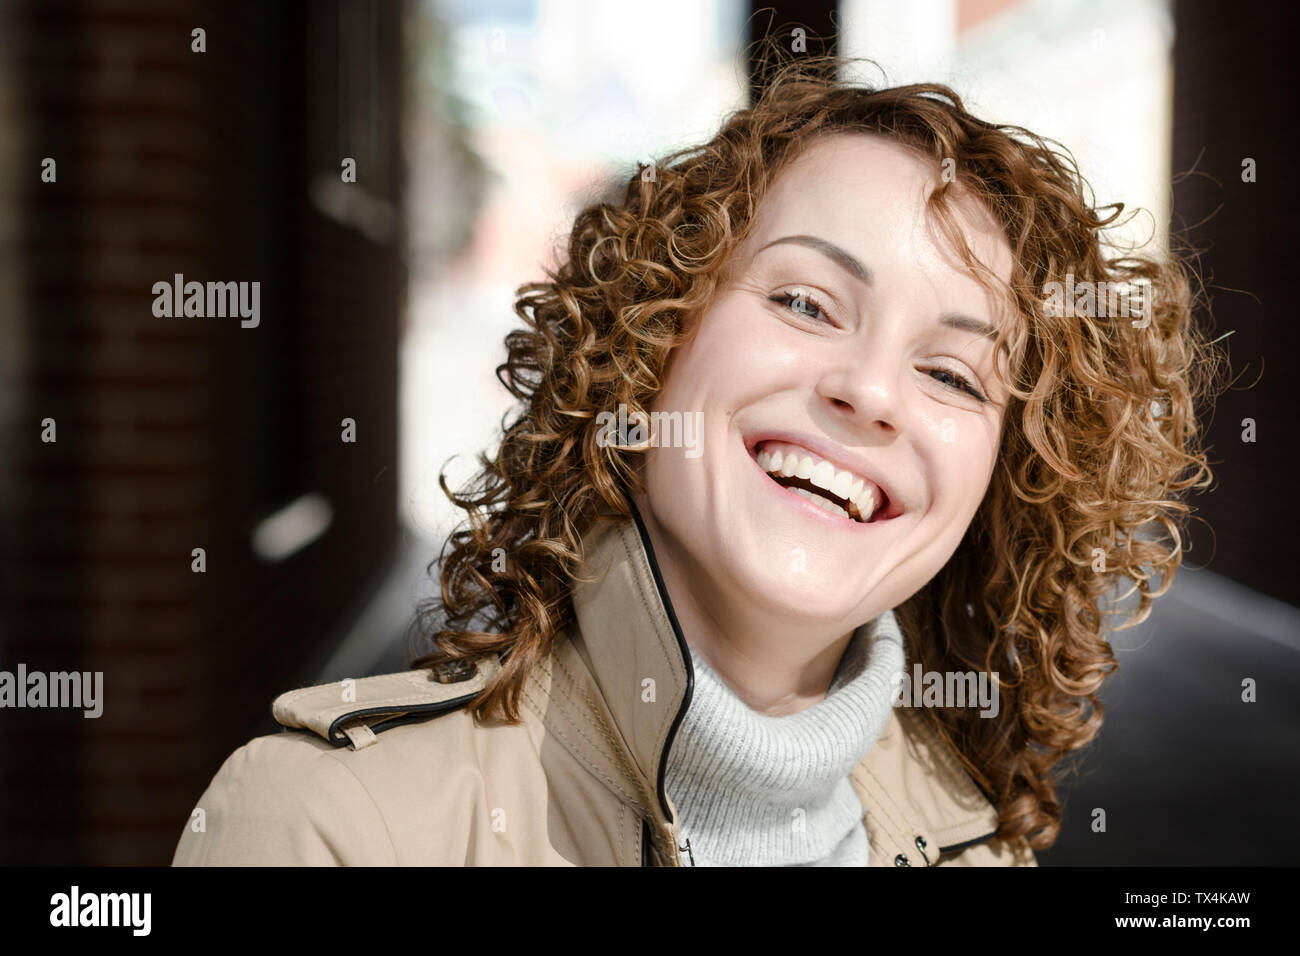 Portrait of laughing woman with curly hair Stock Photo